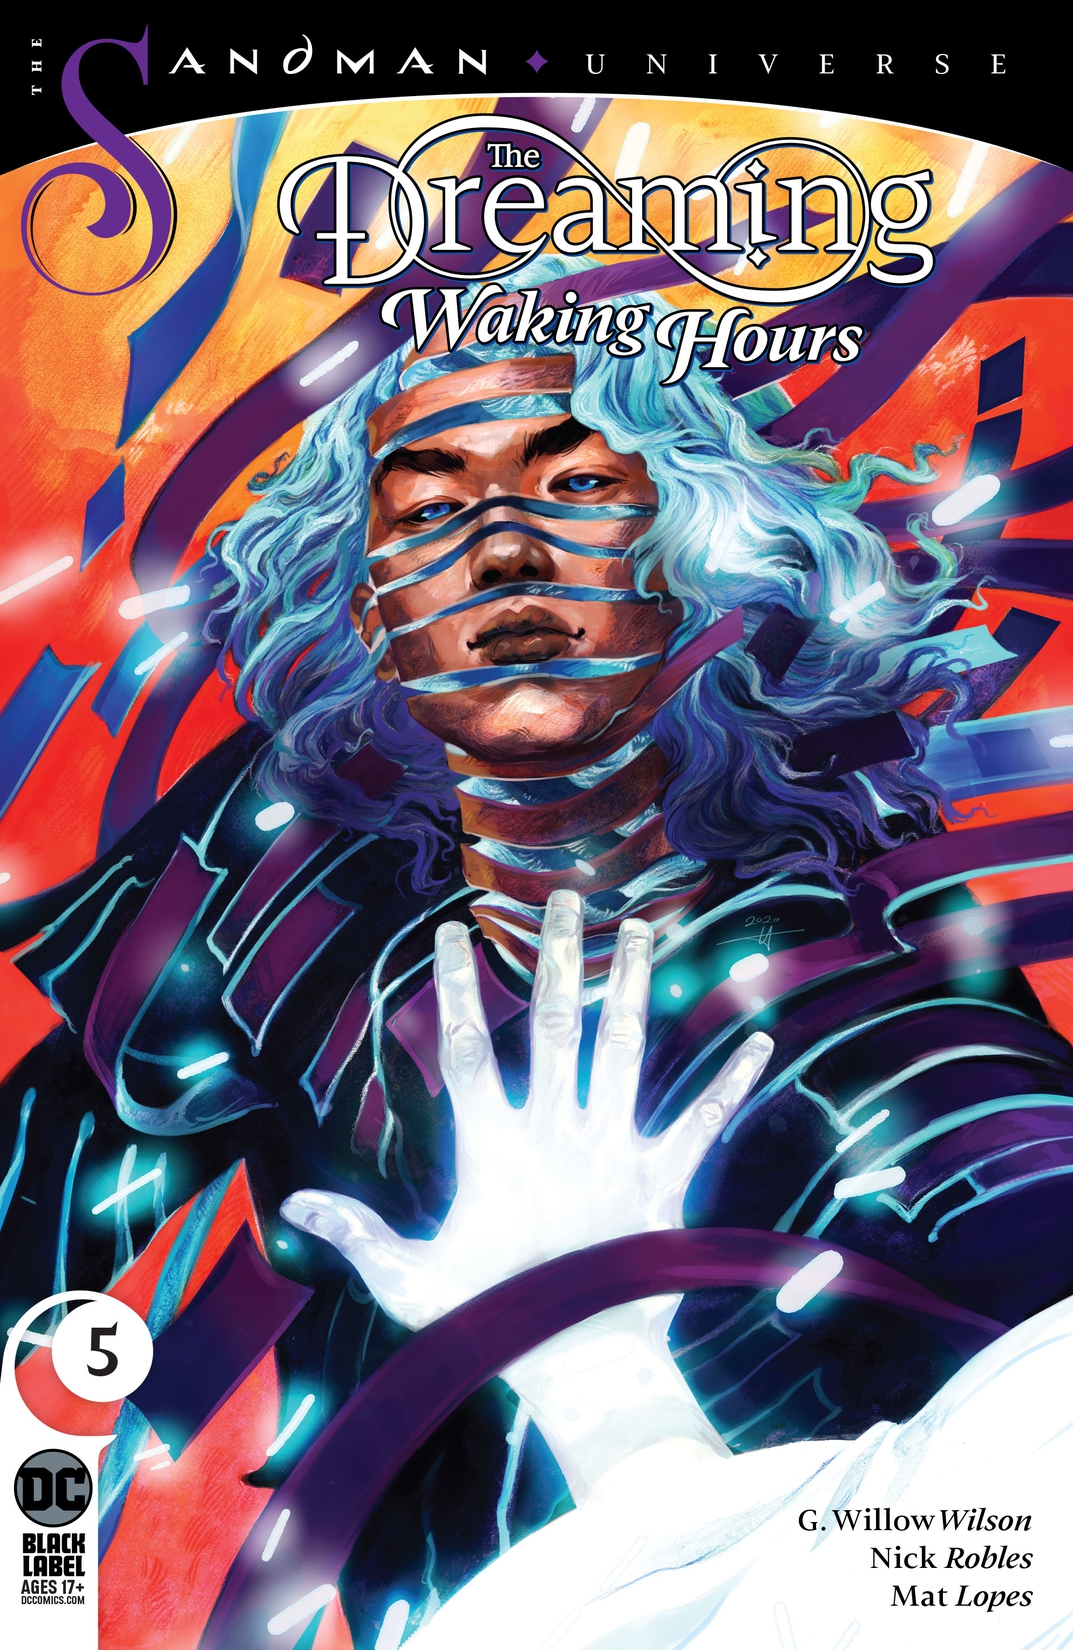 The Dreaming: Waking Hours #5 preview images